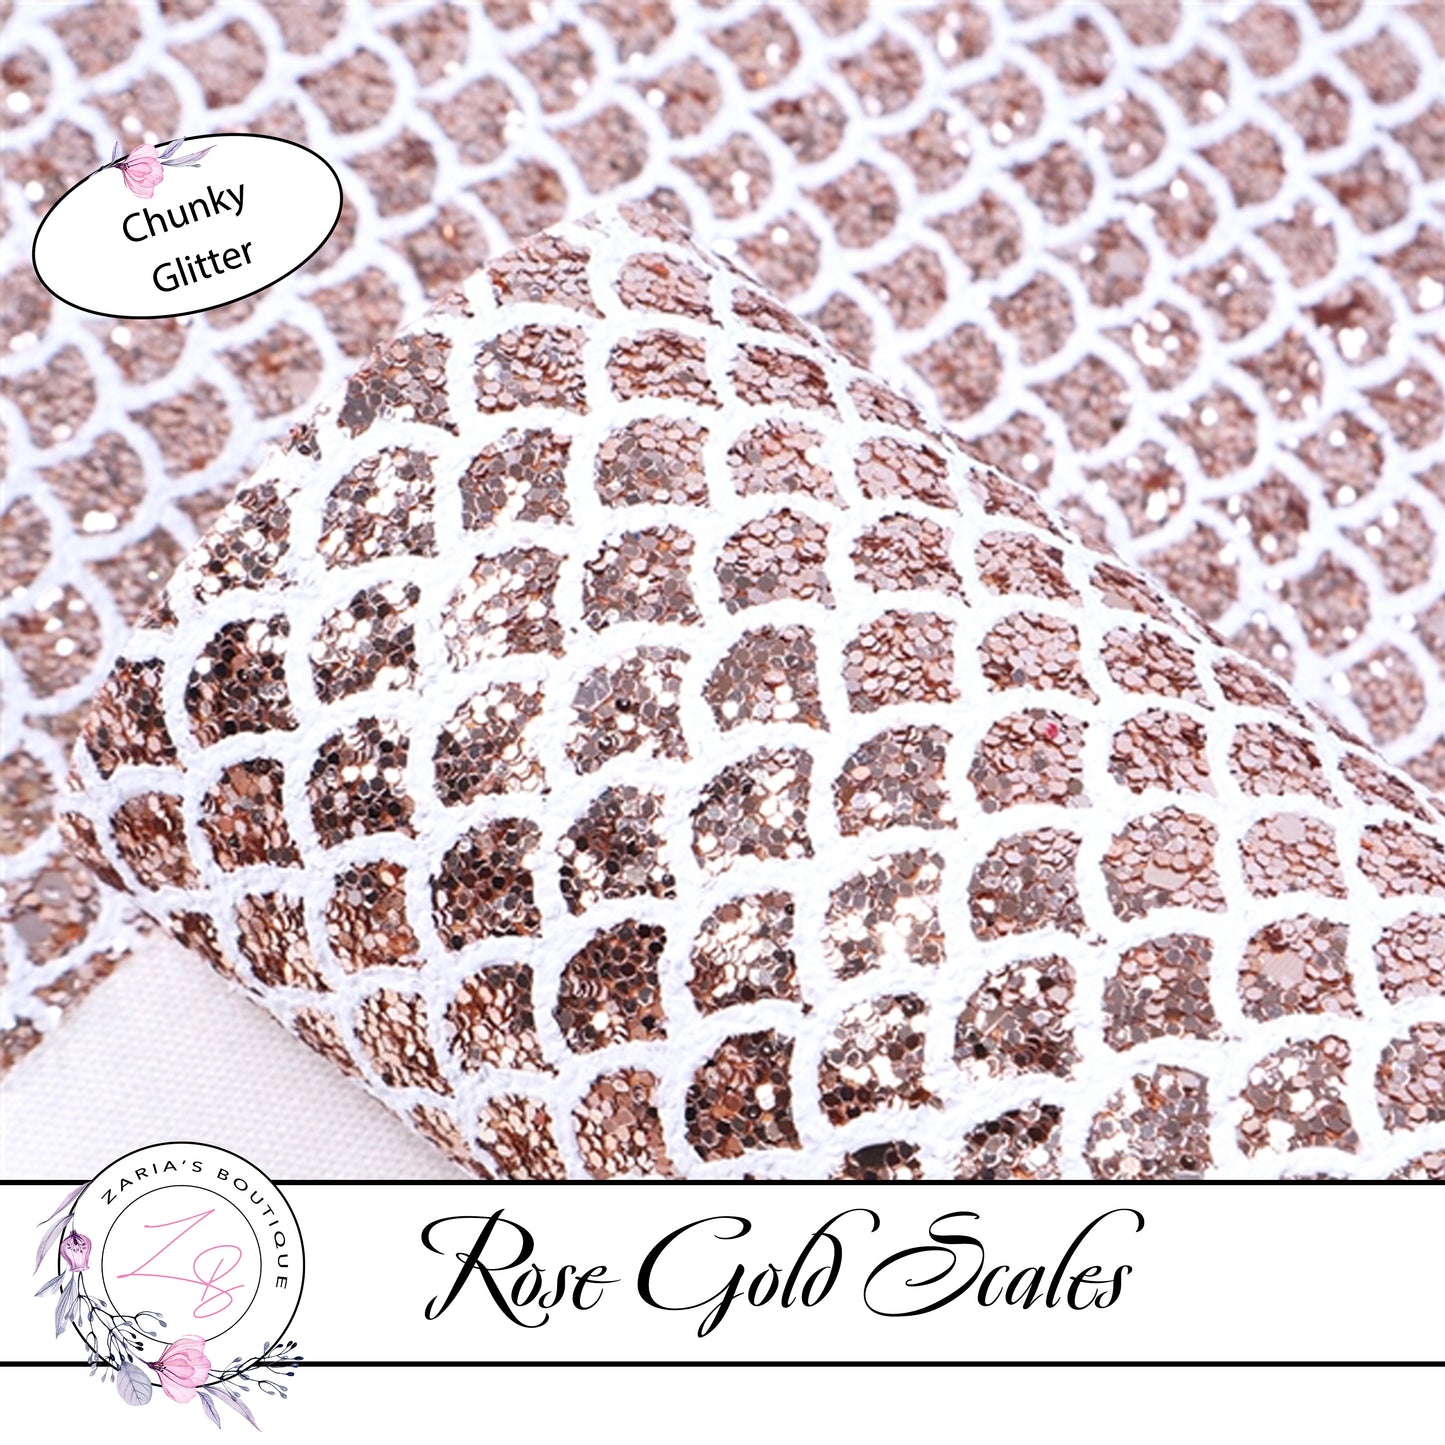 Rose Gold Scales  ⋅  Mermaid Tail ⋅. Fish Scales  ⋅ Chunky Glitter